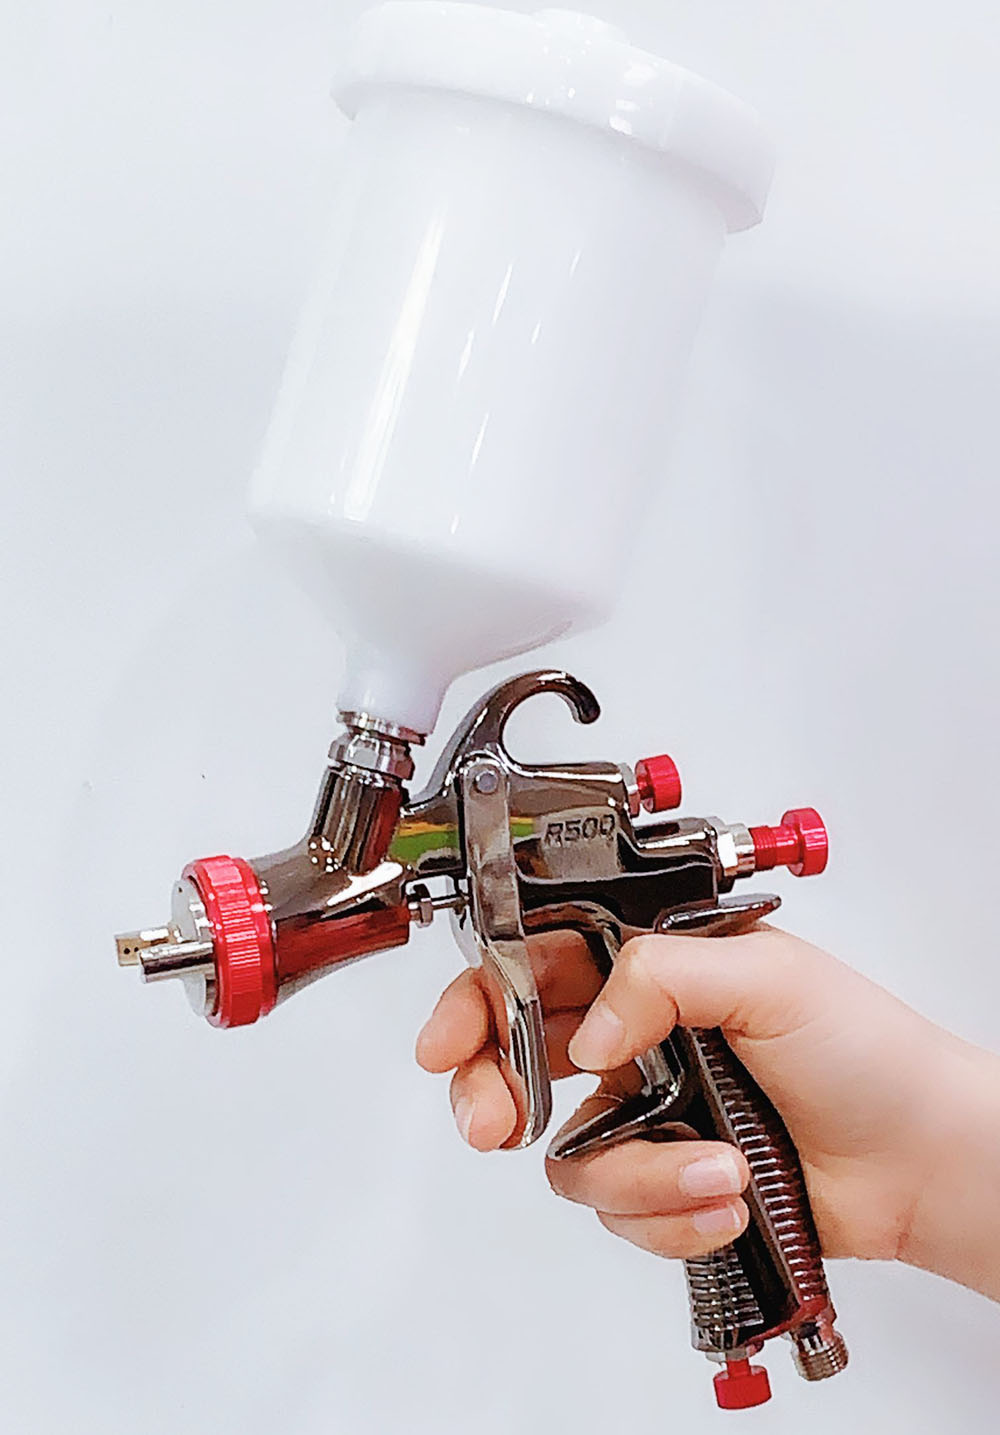 High quality LVLP Air Spray Gun R500 Car Finish Painting 1.3mm Nozzle 600cc Cup Gravity Automotive Finishing Coat Surface Paint